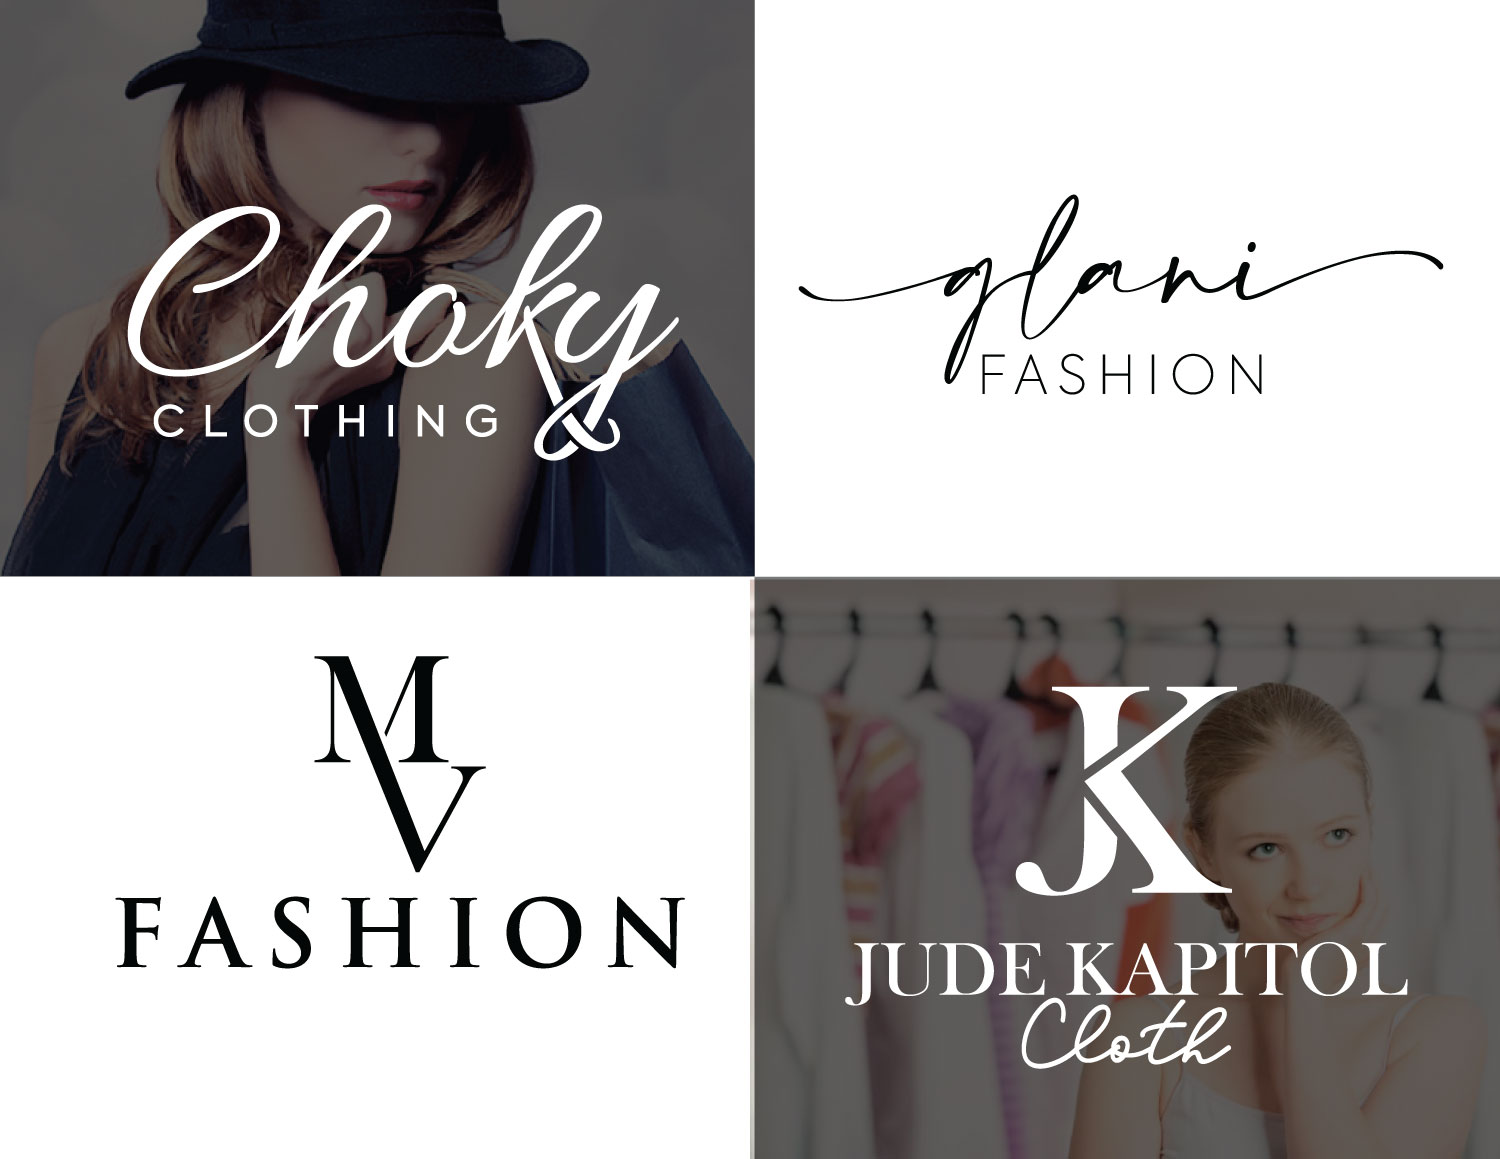 clothing brand about us examples